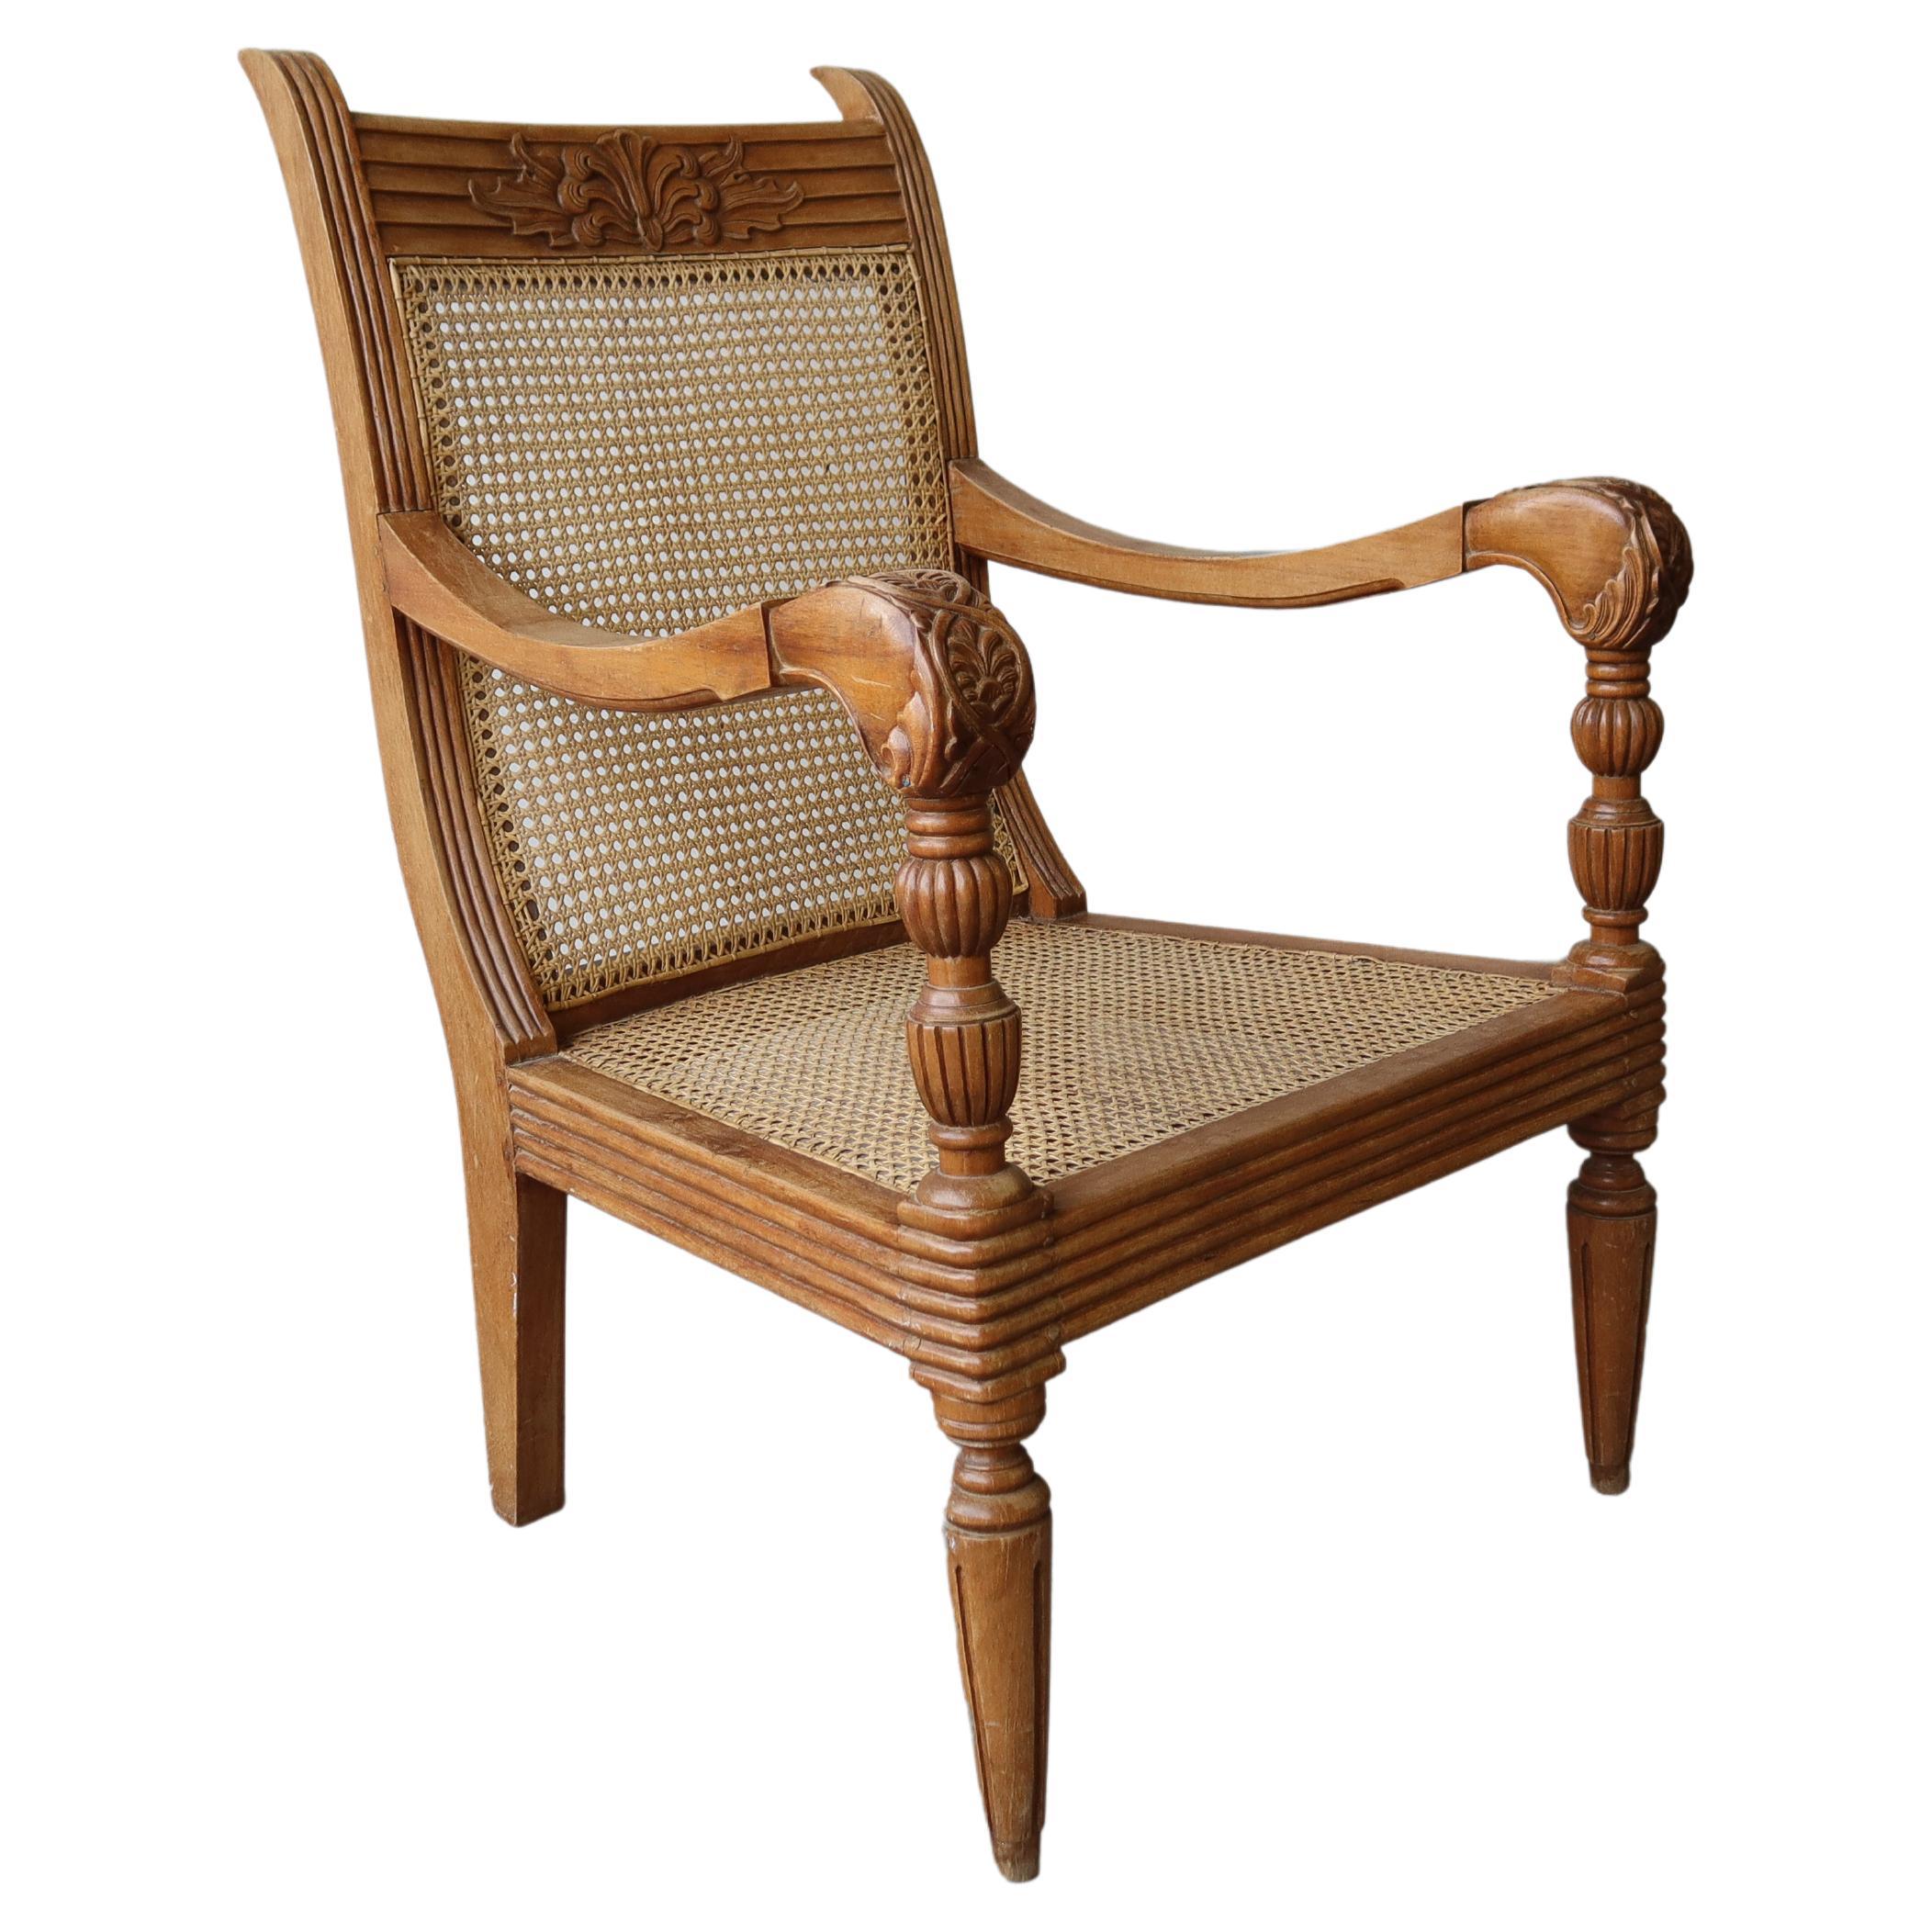 Antique British Colonial Cane and Carved Teak Lounge Chair